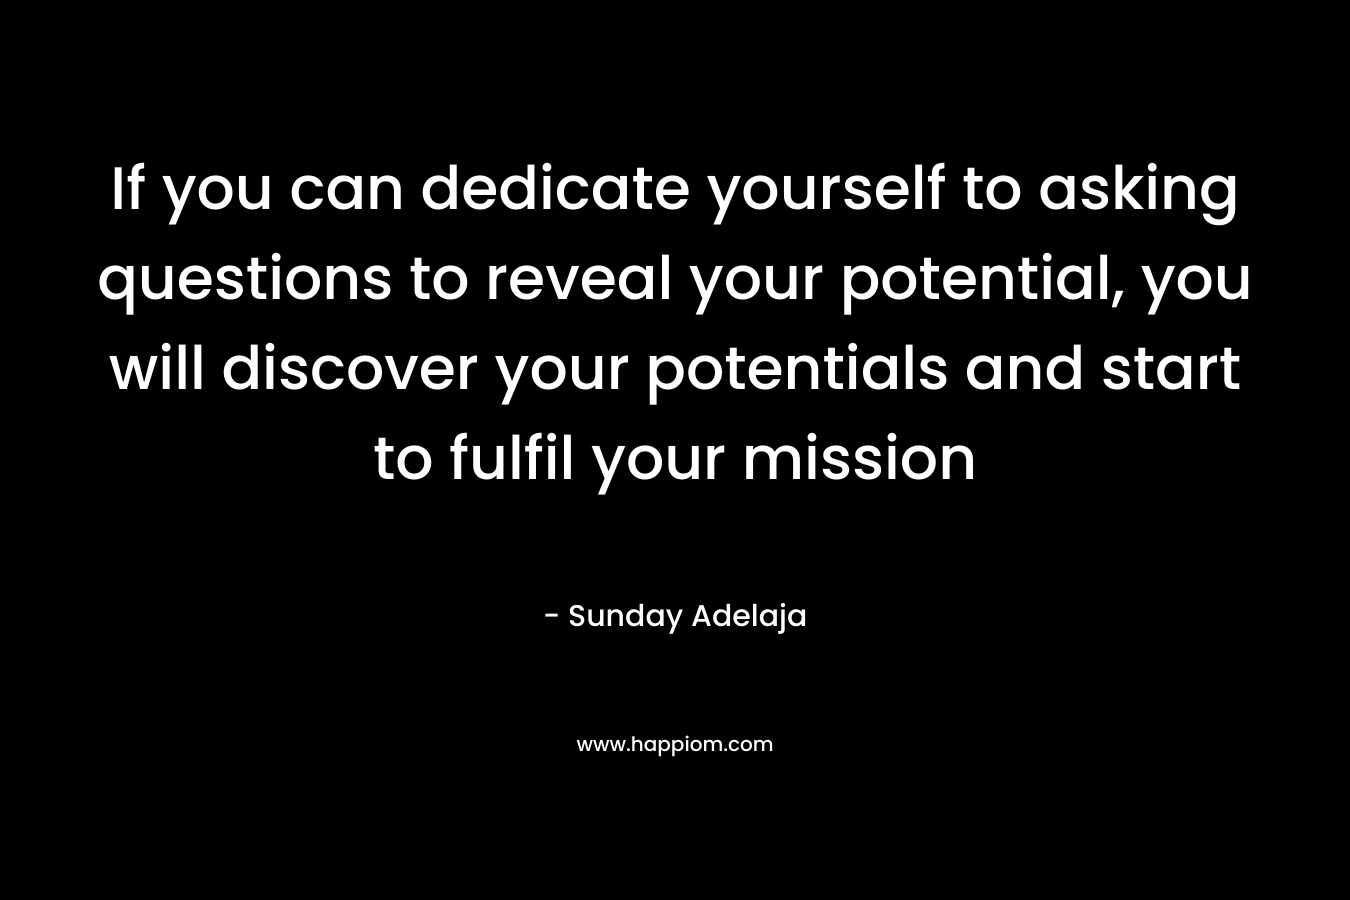 If you can dedicate yourself to asking questions to reveal your potential, you will discover your potentials and start to fulfil your mission – Sunday Adelaja